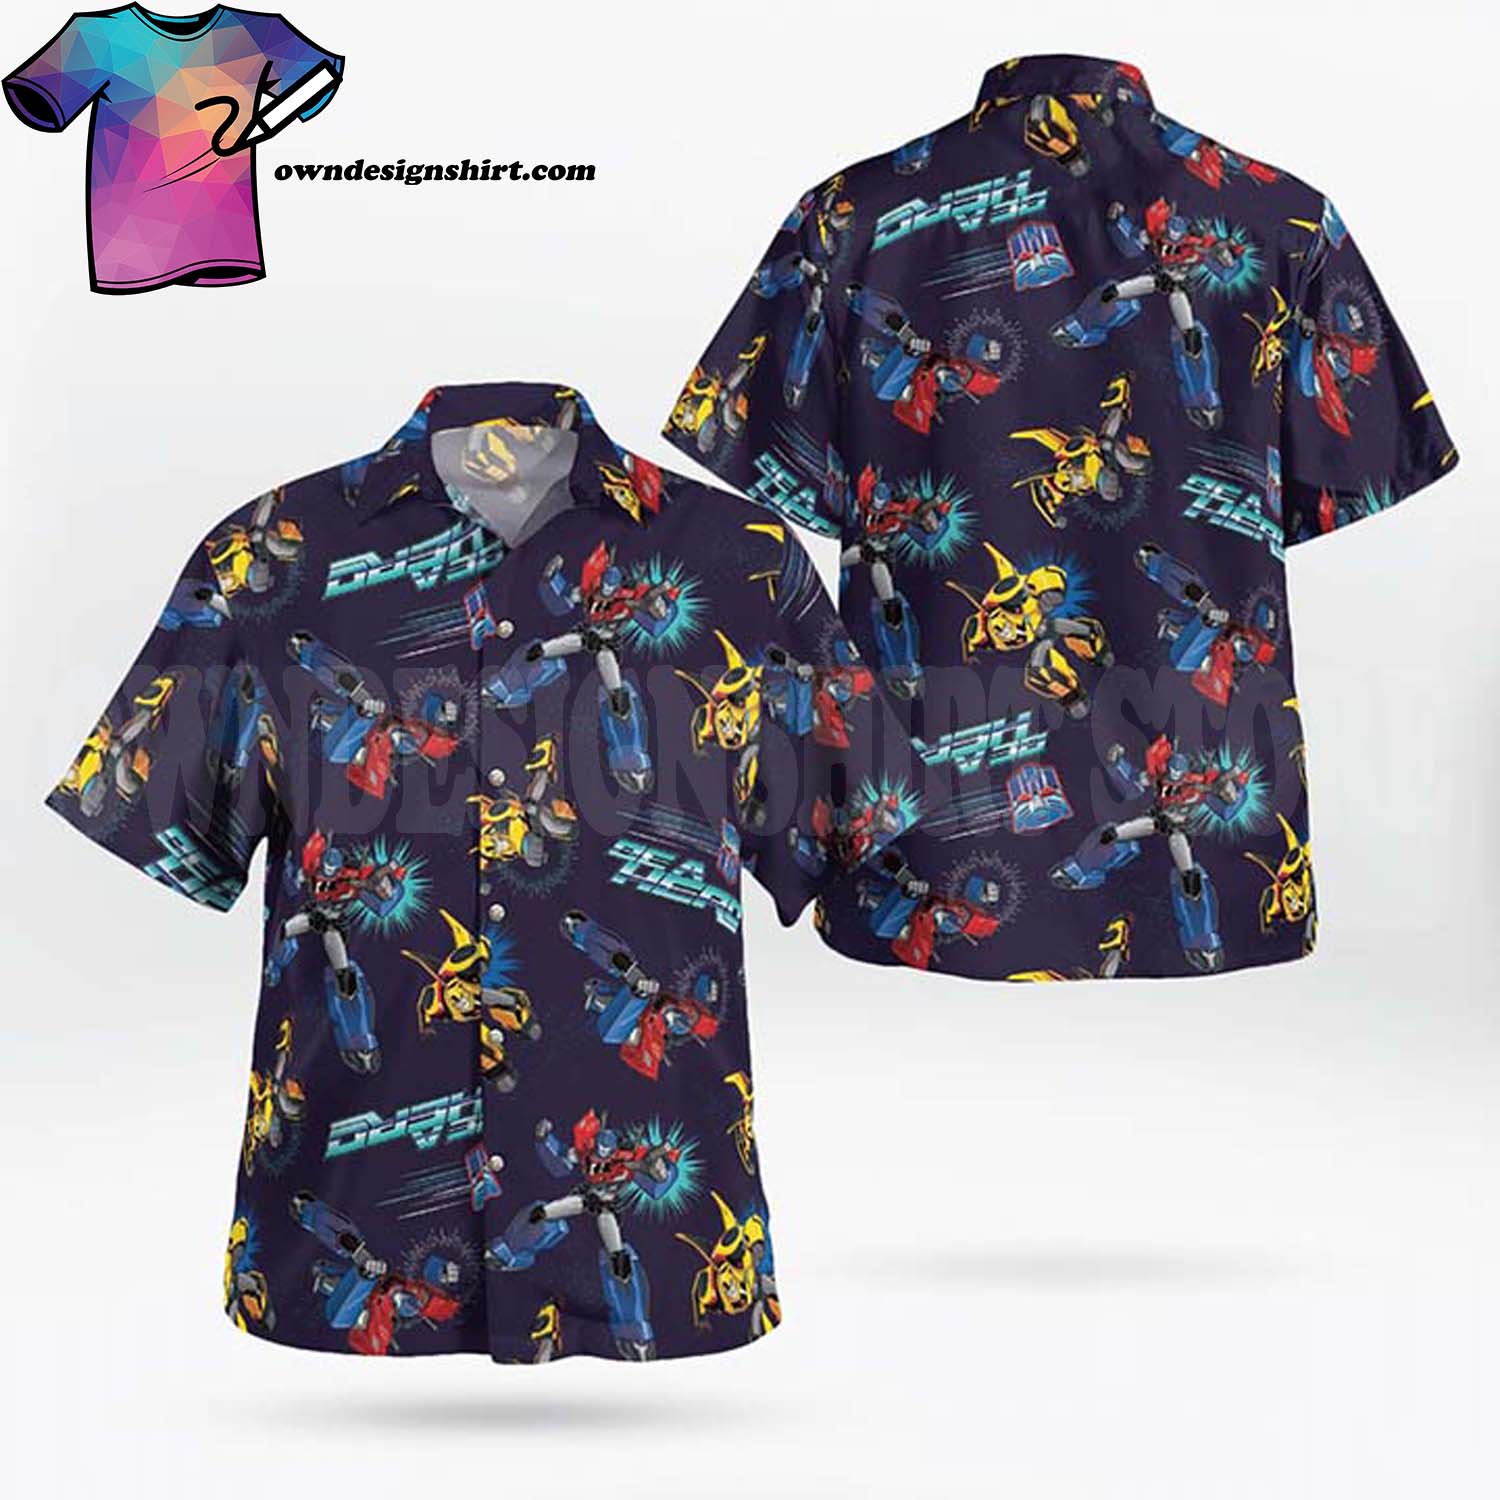 Let's talk about Transformers x Halo and why to choose the Transformers Hawaiian shirt